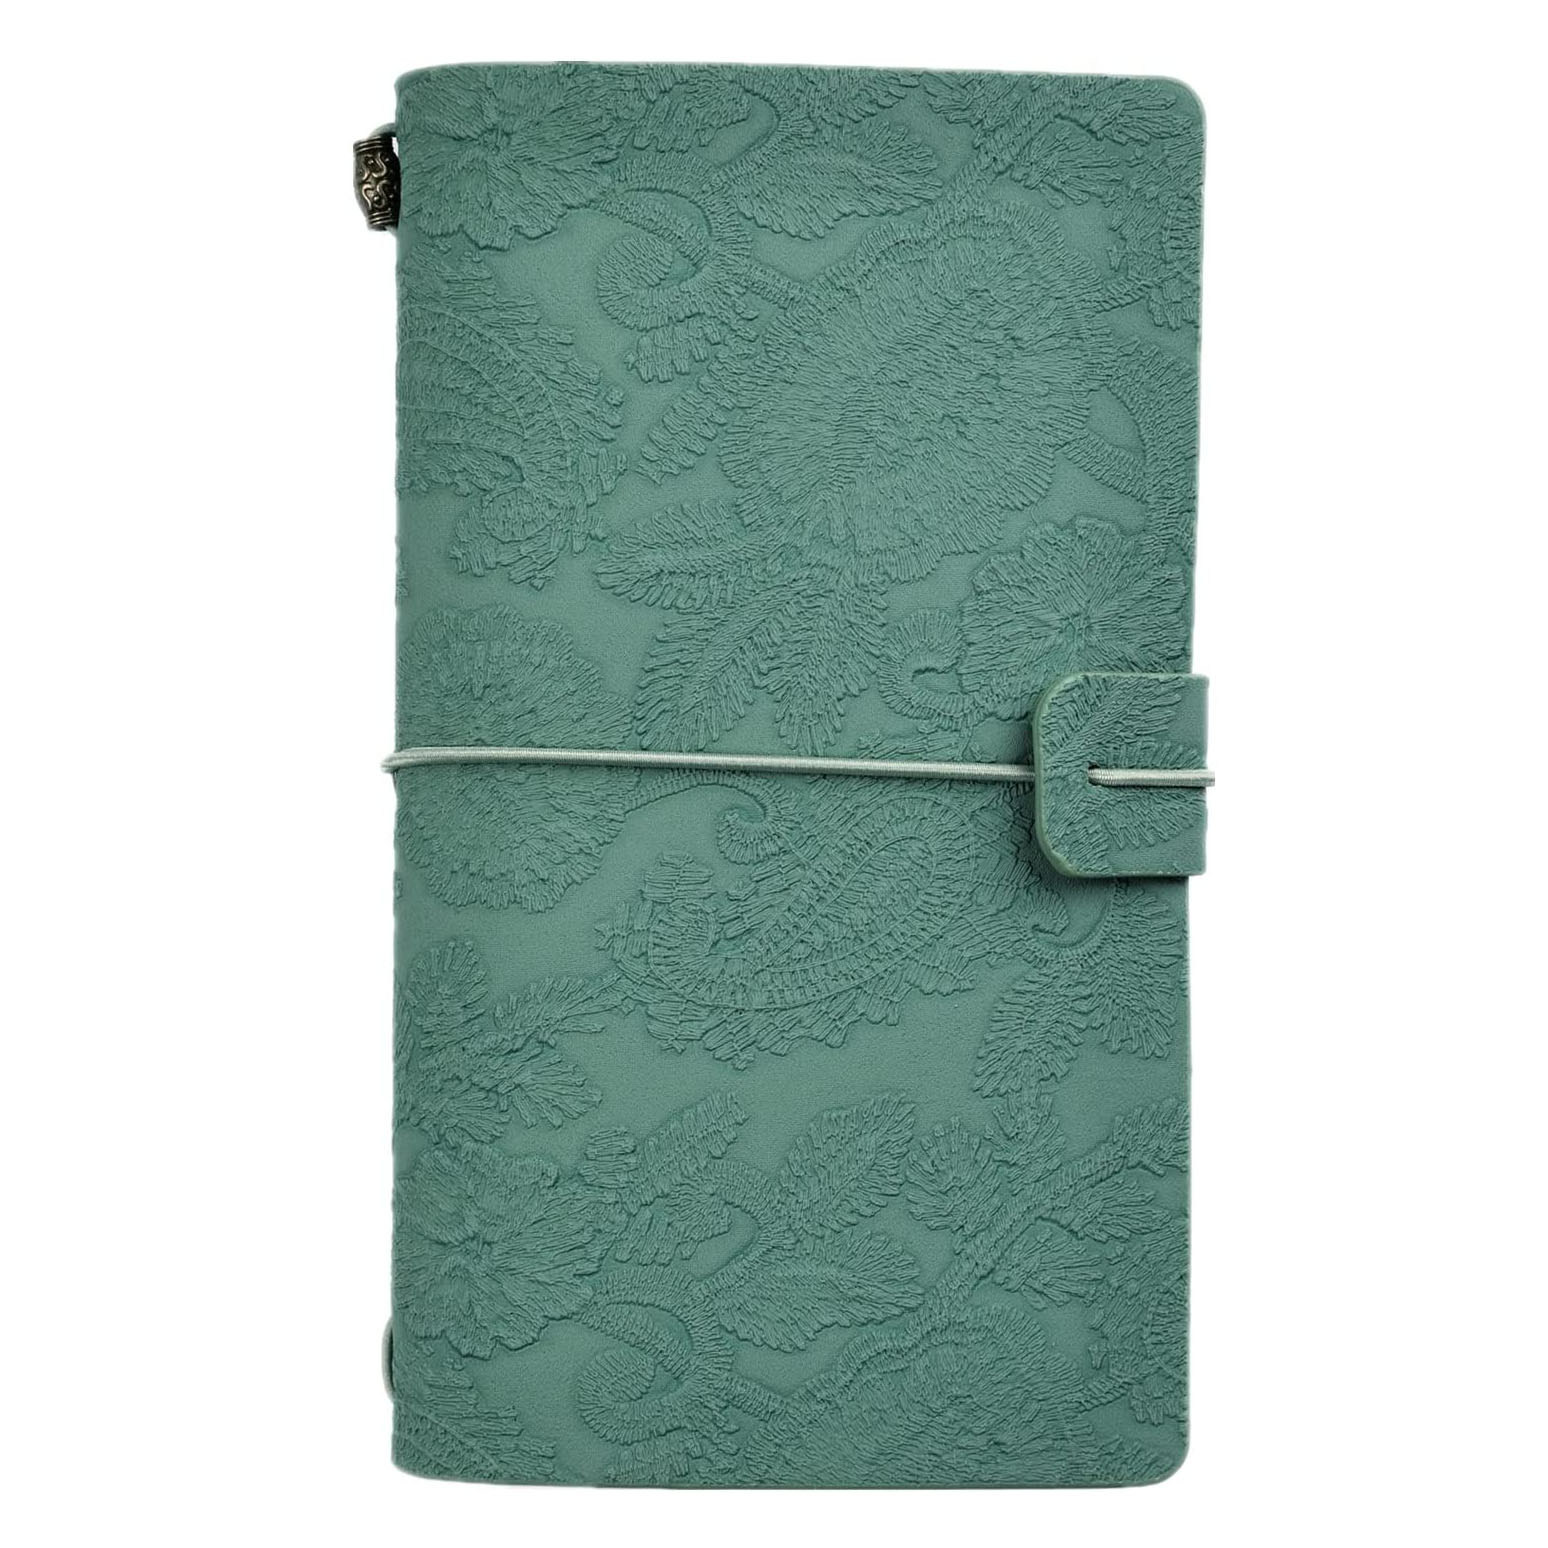 A6 Refillable Planner Leather Travel Journal Notebook-Embossed  Pocket Diary -Gift for Girls,Women,Mom, Daughter (192 Pages)